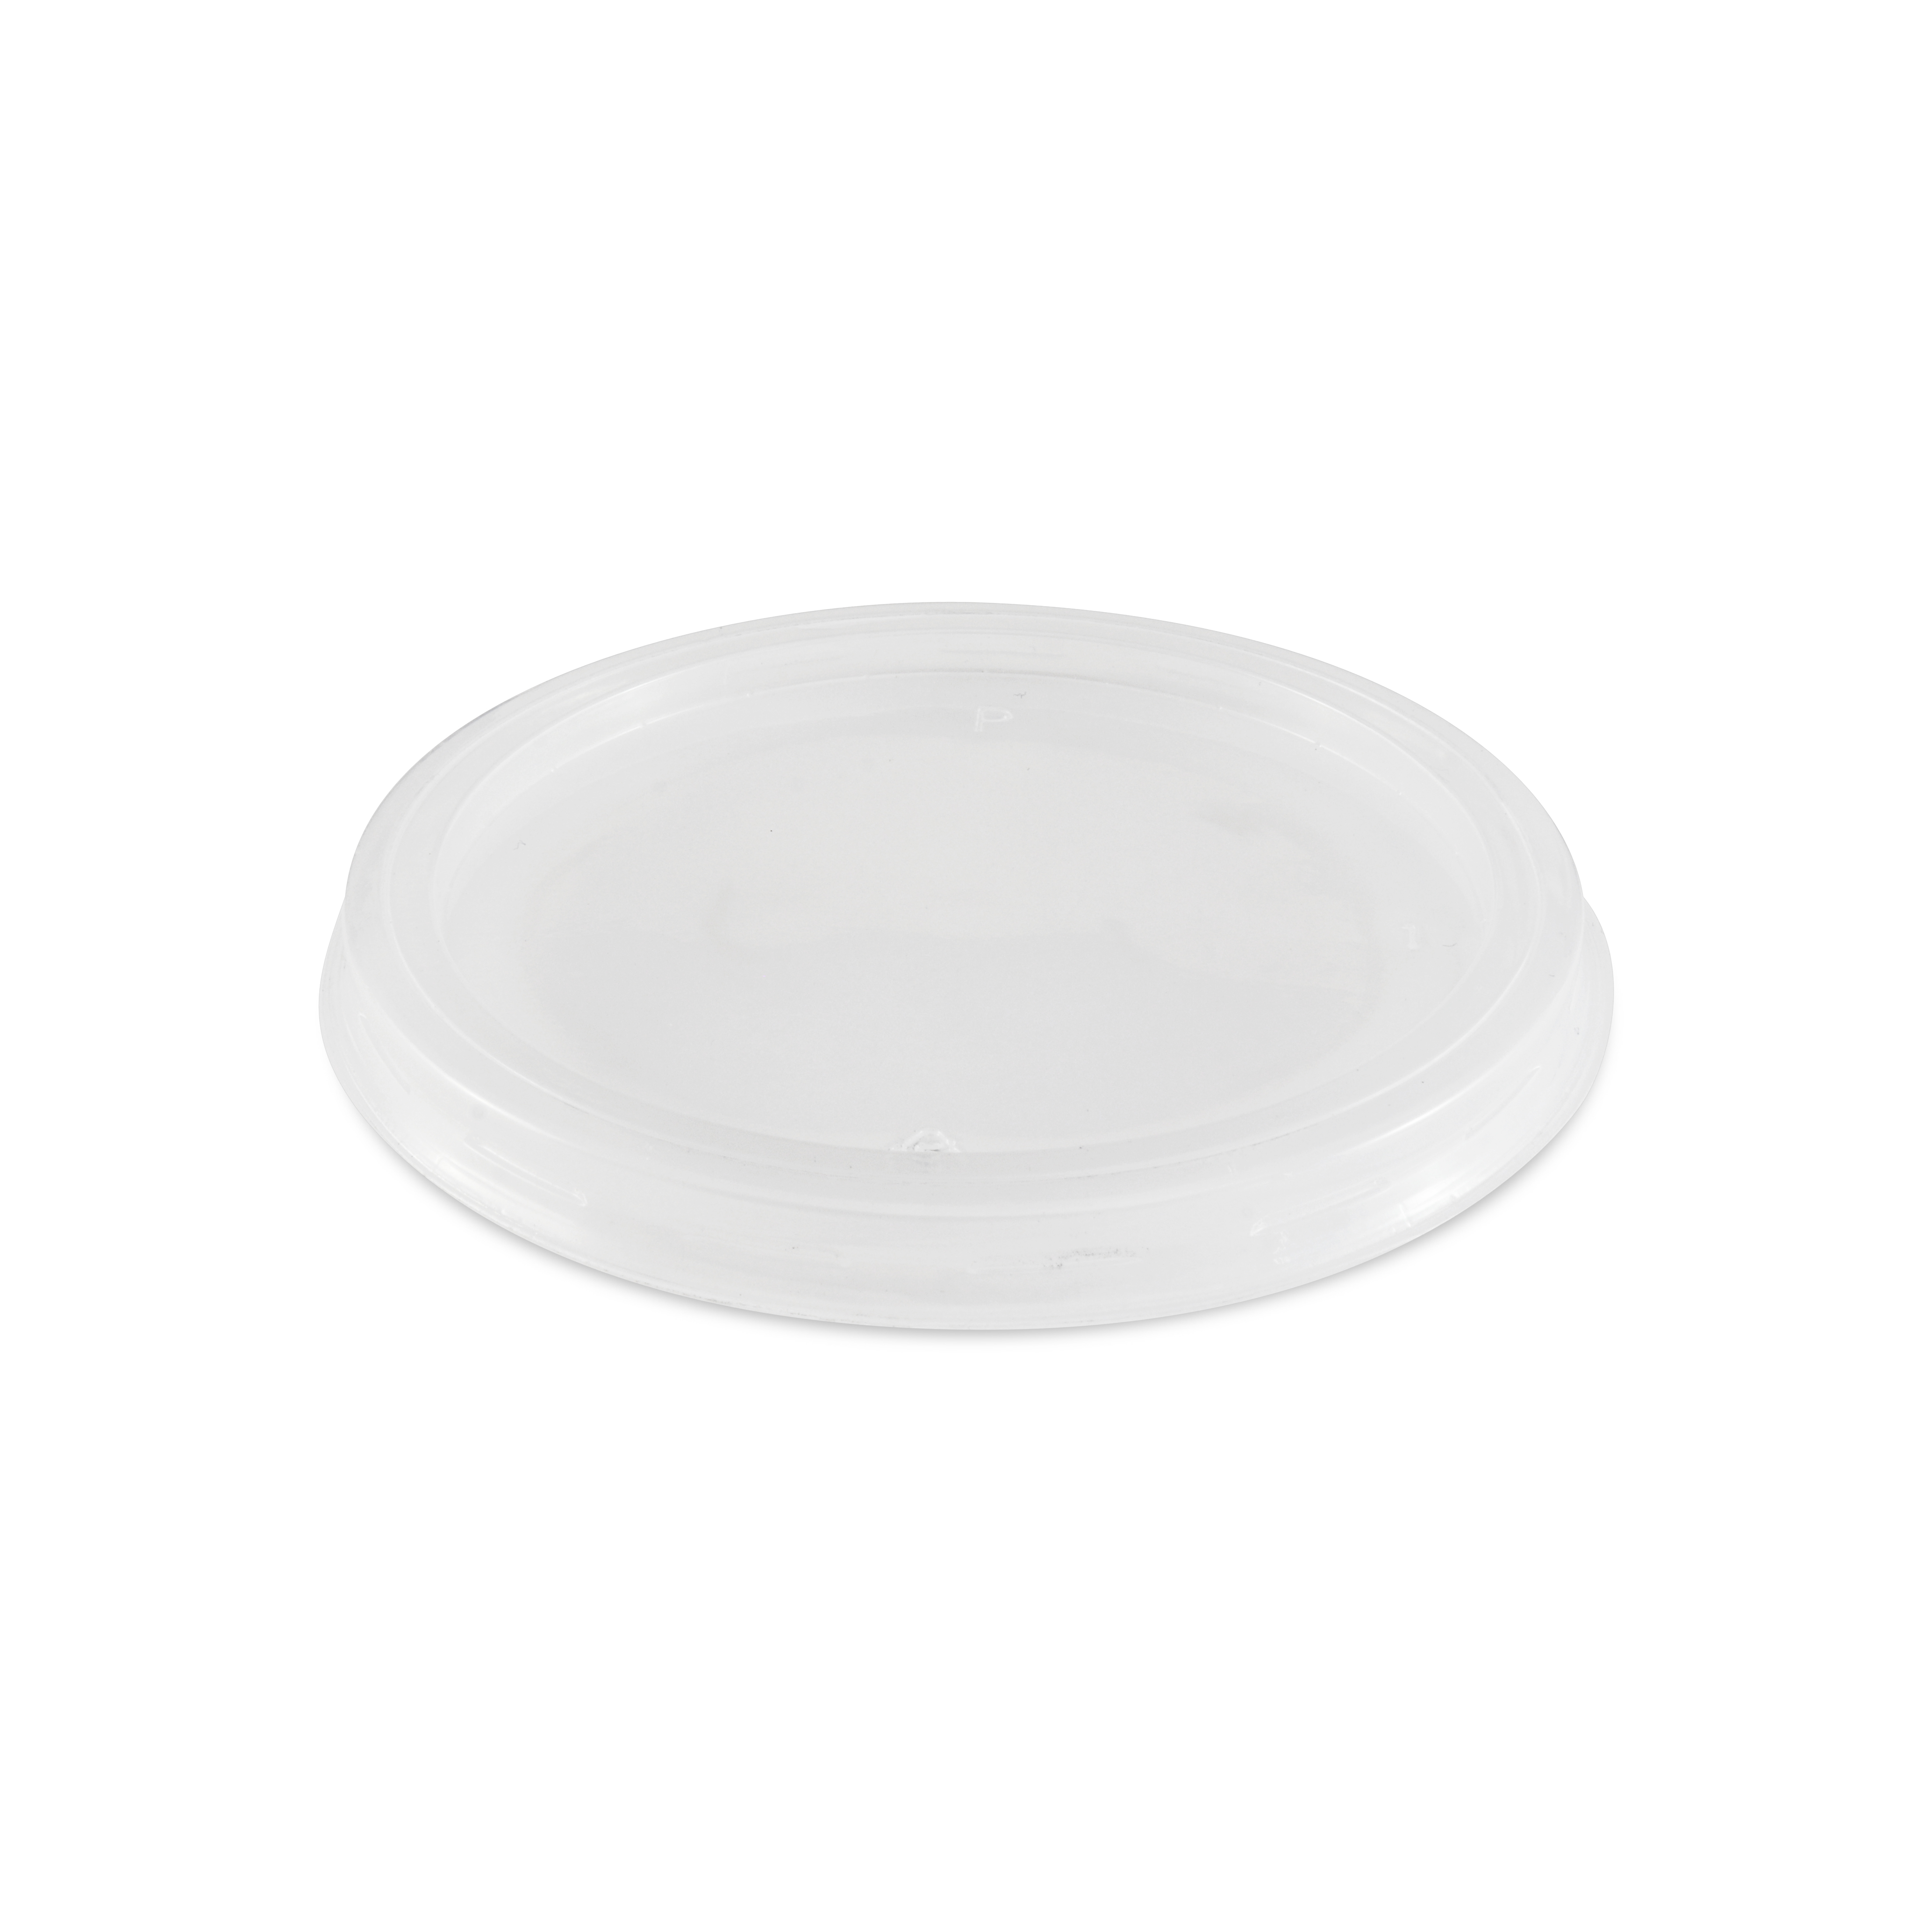 https://www.berryglobal.com/-/media/Berry/Images/Products/Berry-Global/95mm-Clear-PP-Flat-Lid-13662496/95mm_flat_clear_polyprop_lid_13662496.ashx